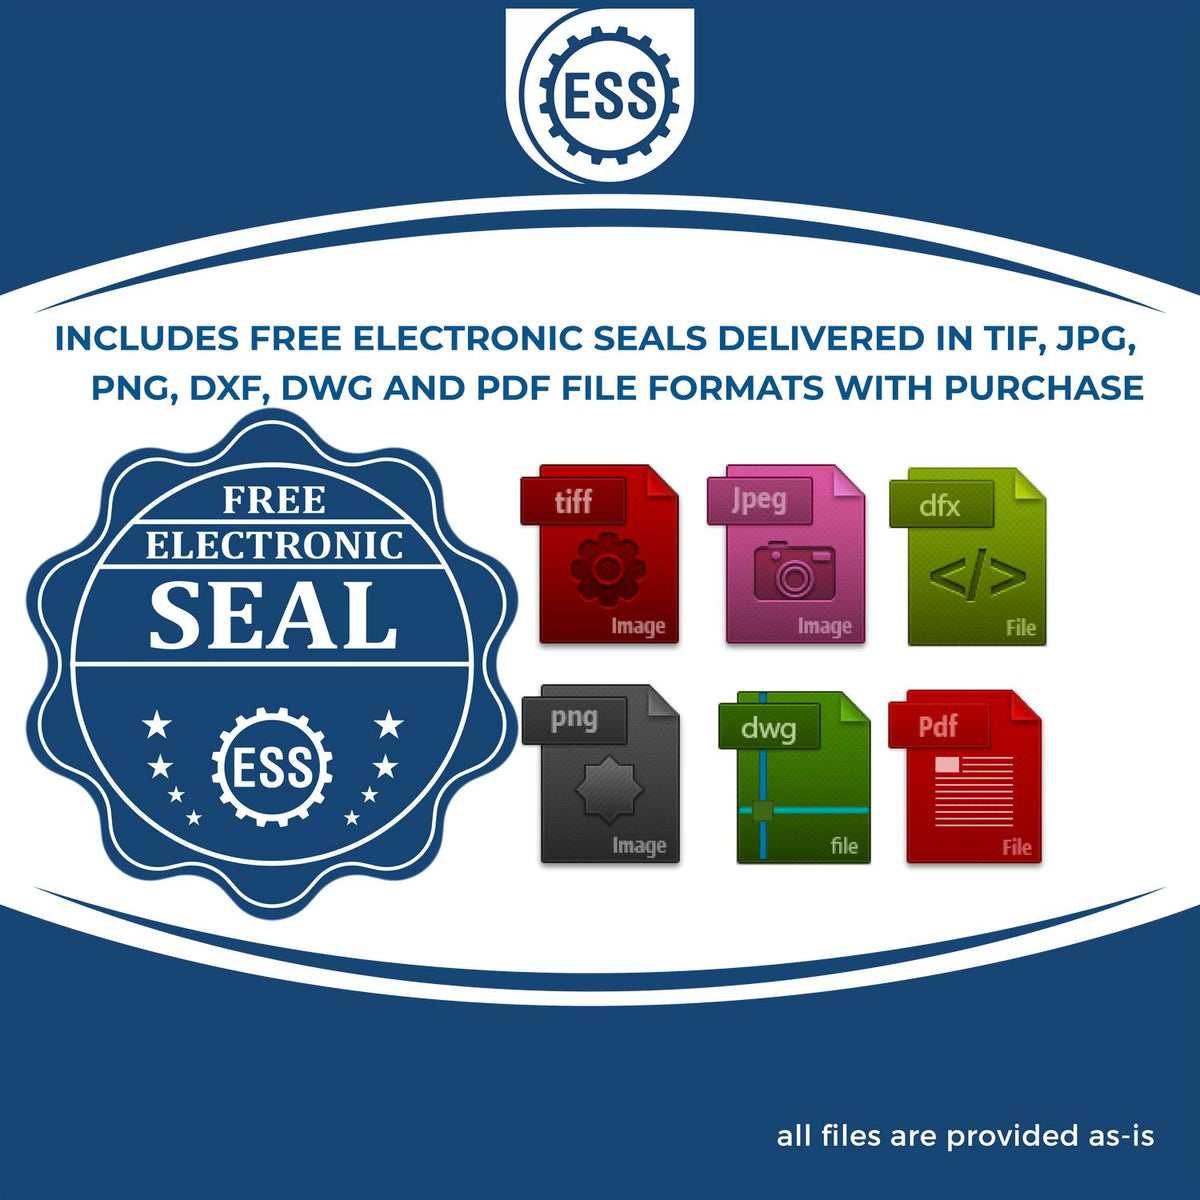 An infographic for the free electronic seal for the Slim Pre-Inked Indiana Professional Geologist Seal Stamp illustrating the different file type icons such as DXF, DWG, TIF, JPG and PNG.